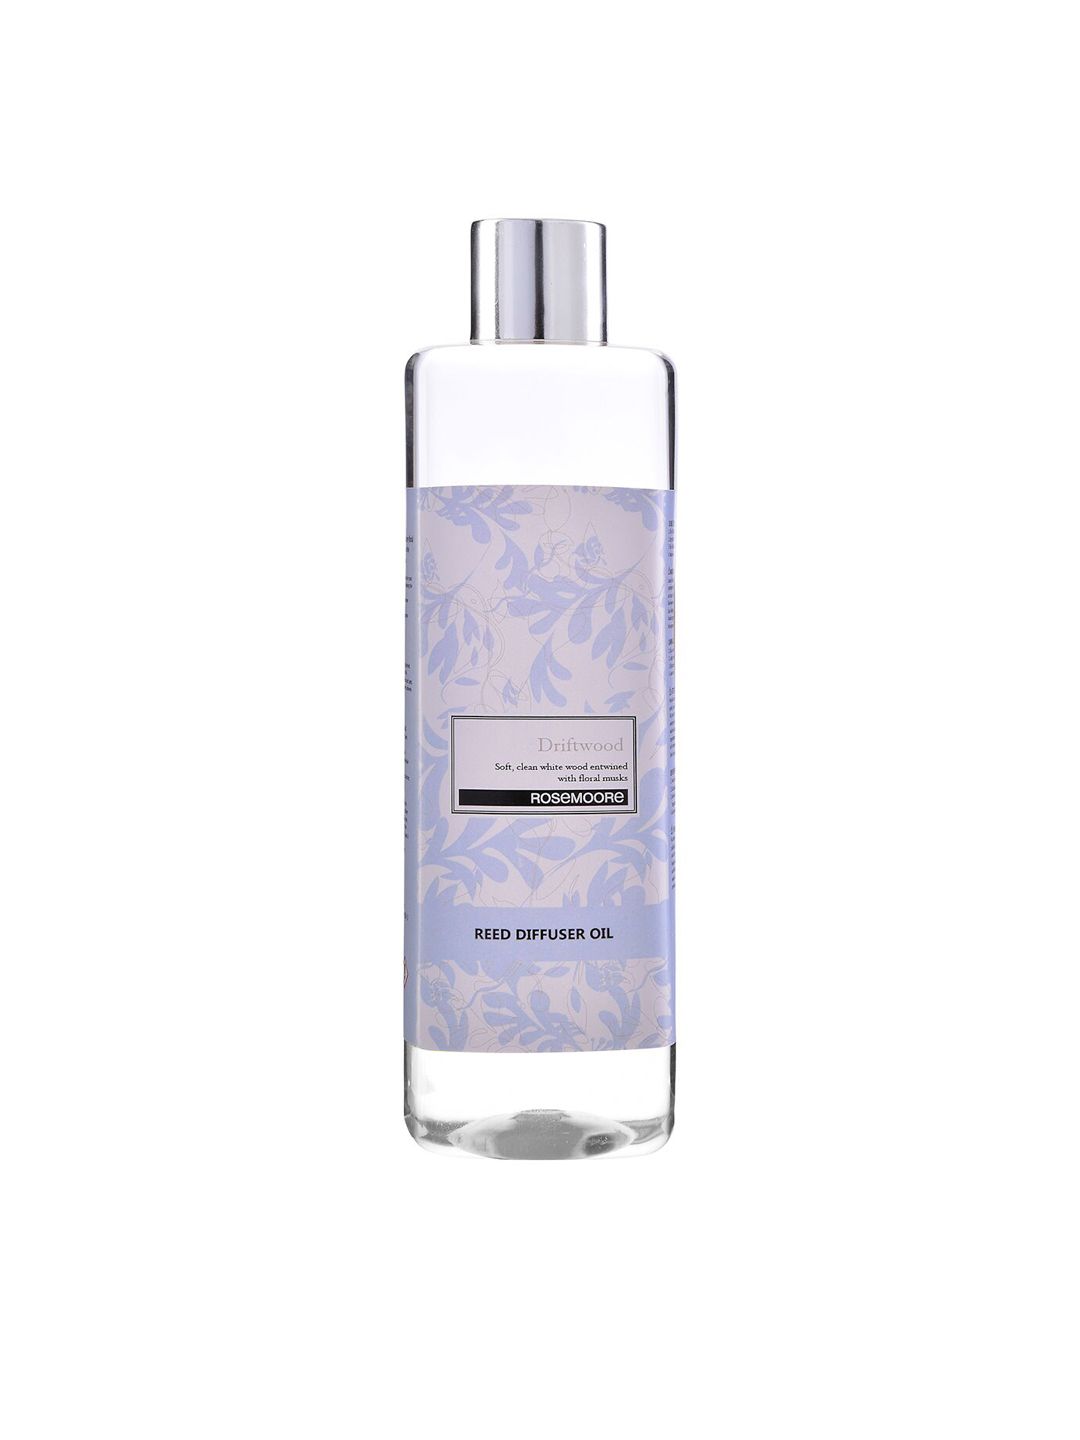 ROSEMOORe Driftwood Scented Reed Diffuser Refill -1 litre Price in India